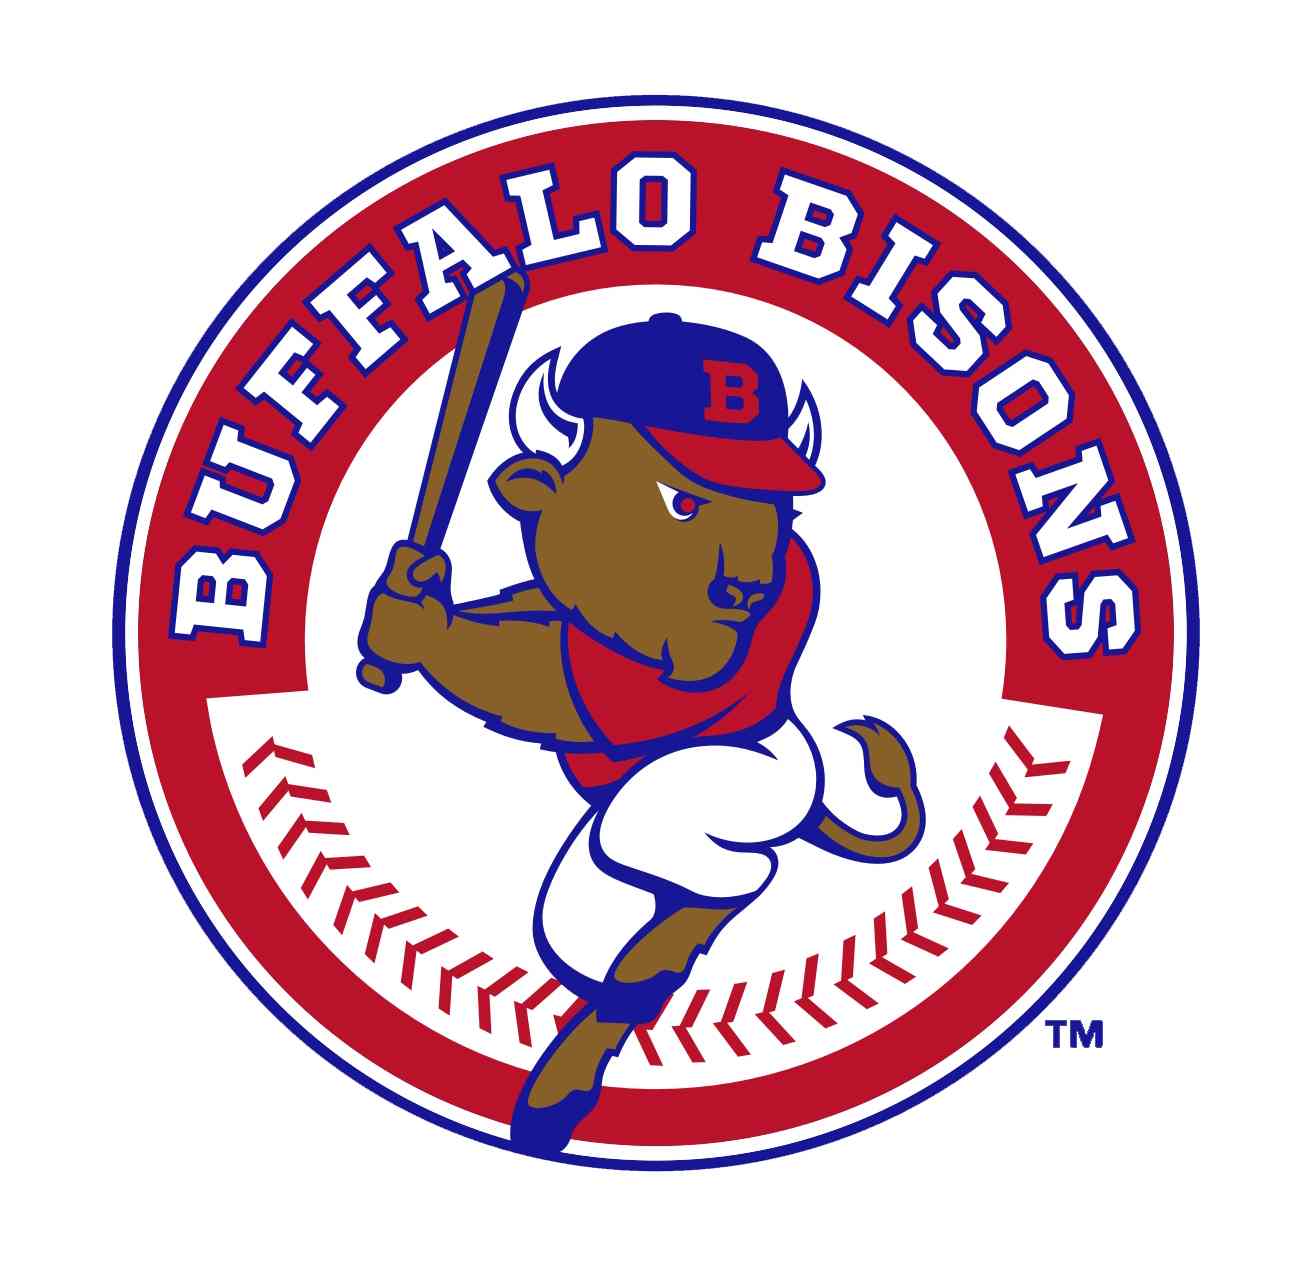 Hall of Famer Roberto Alomar to throw ceremonial first pitch at Bisons home opener